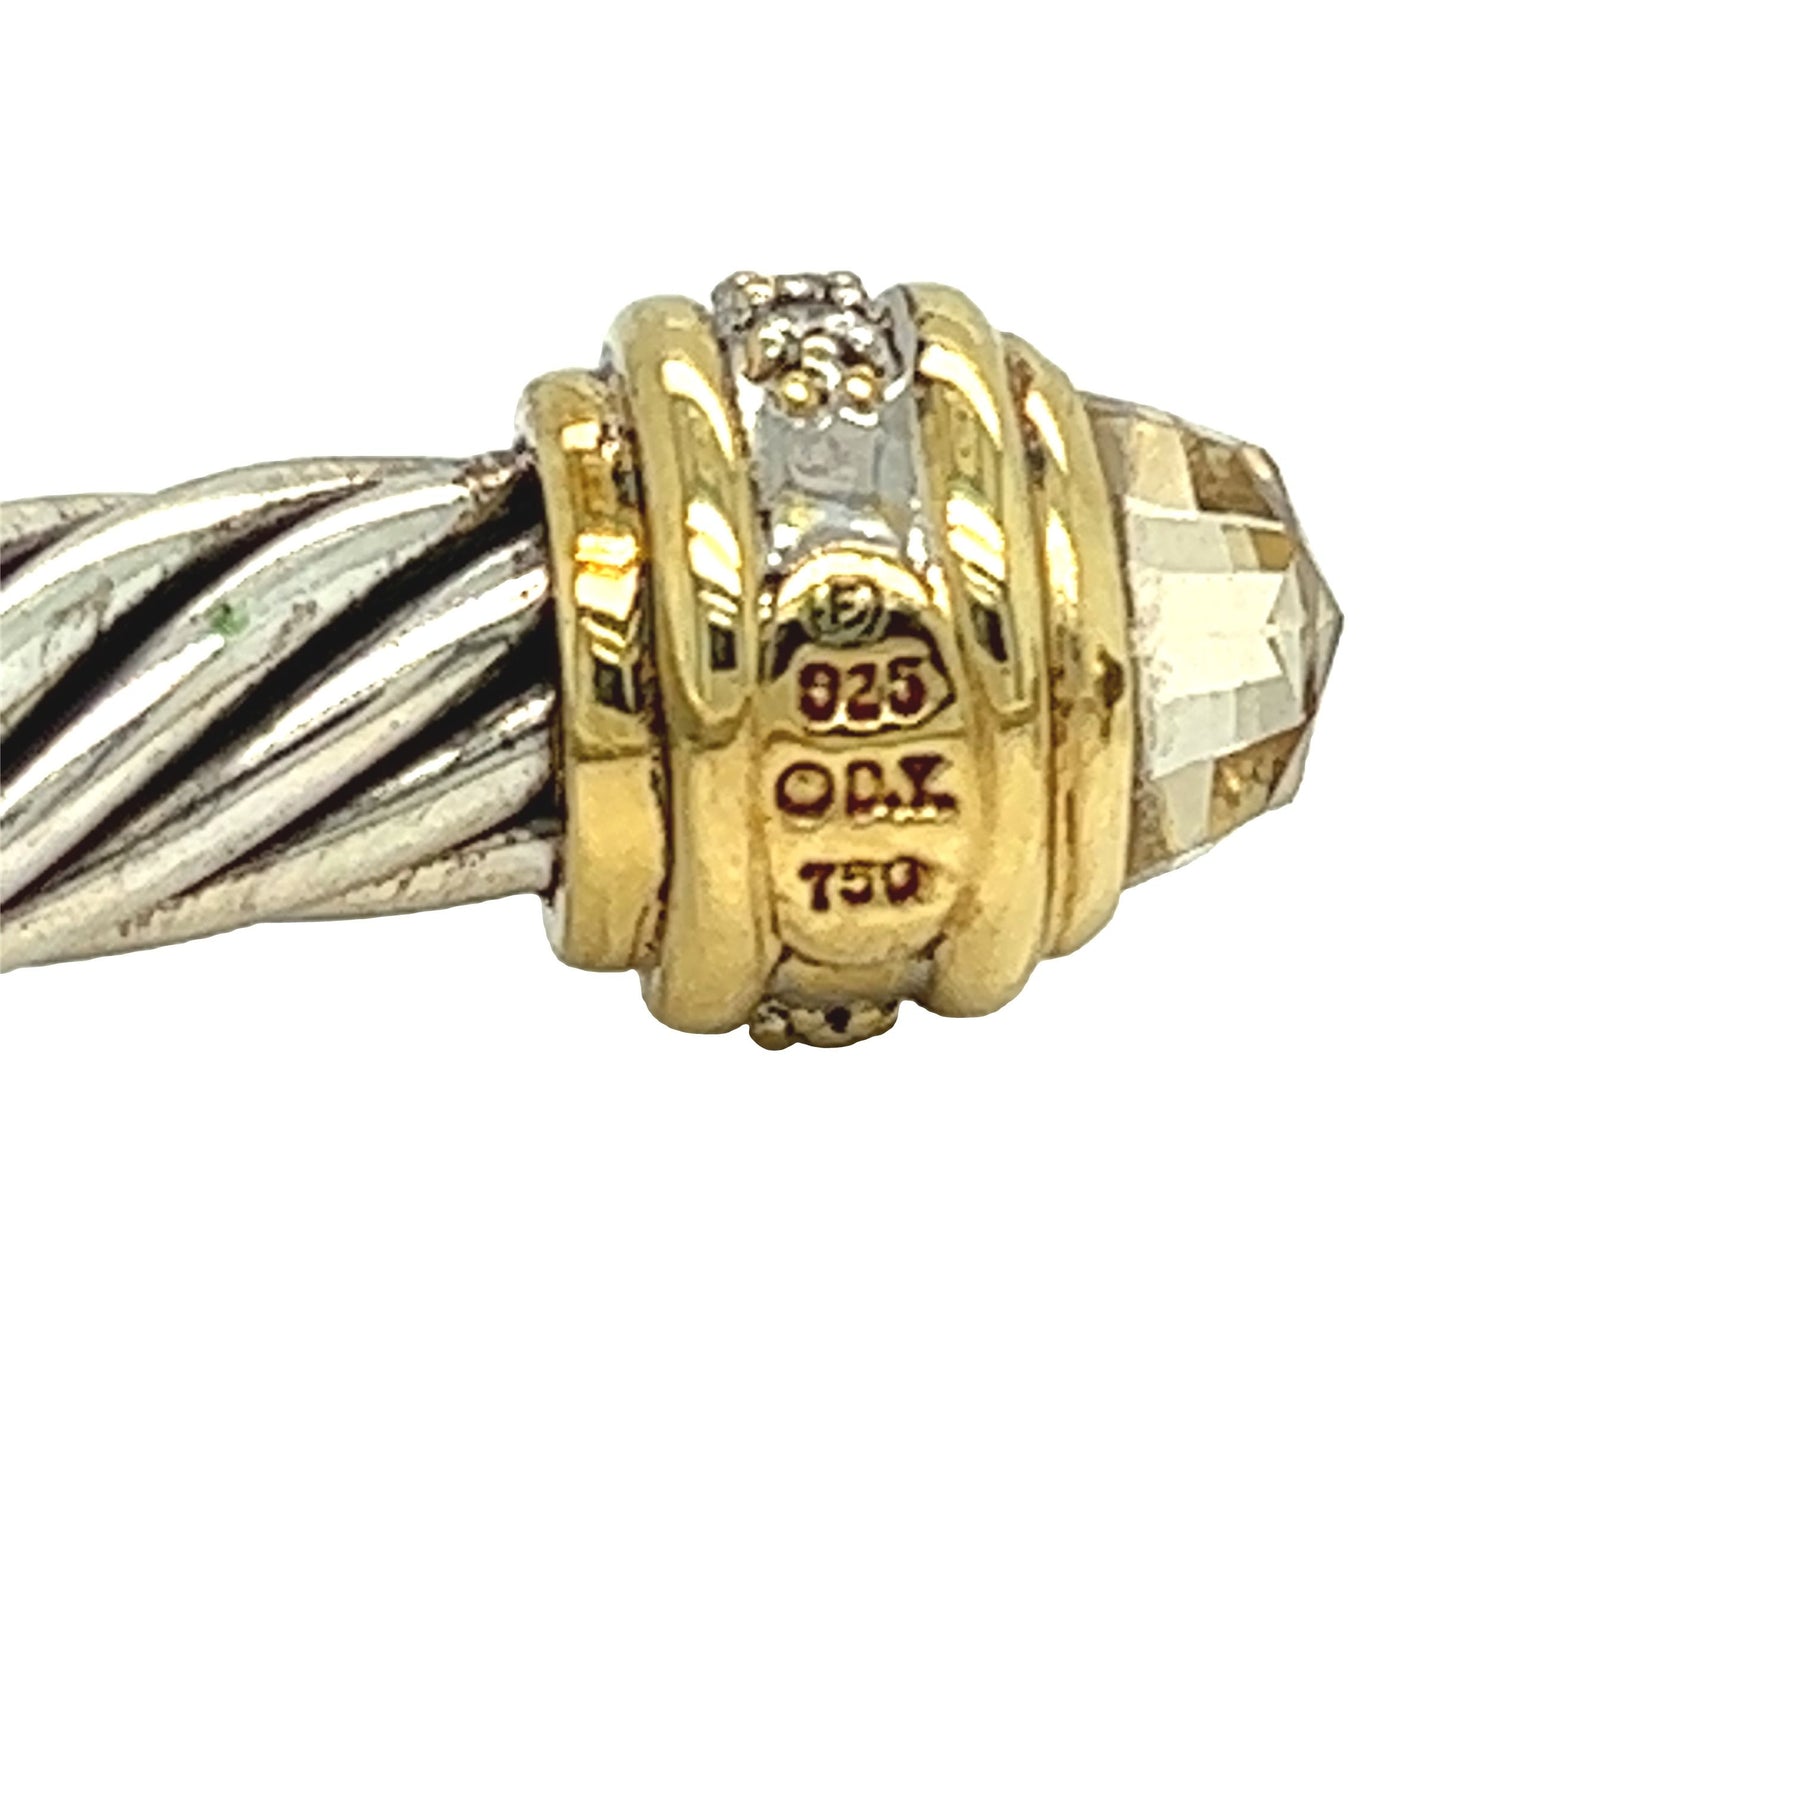 Bracelet Citrine Diamond David and Forever Cuff – Gems Yurman Bangle Cable Silver and Are